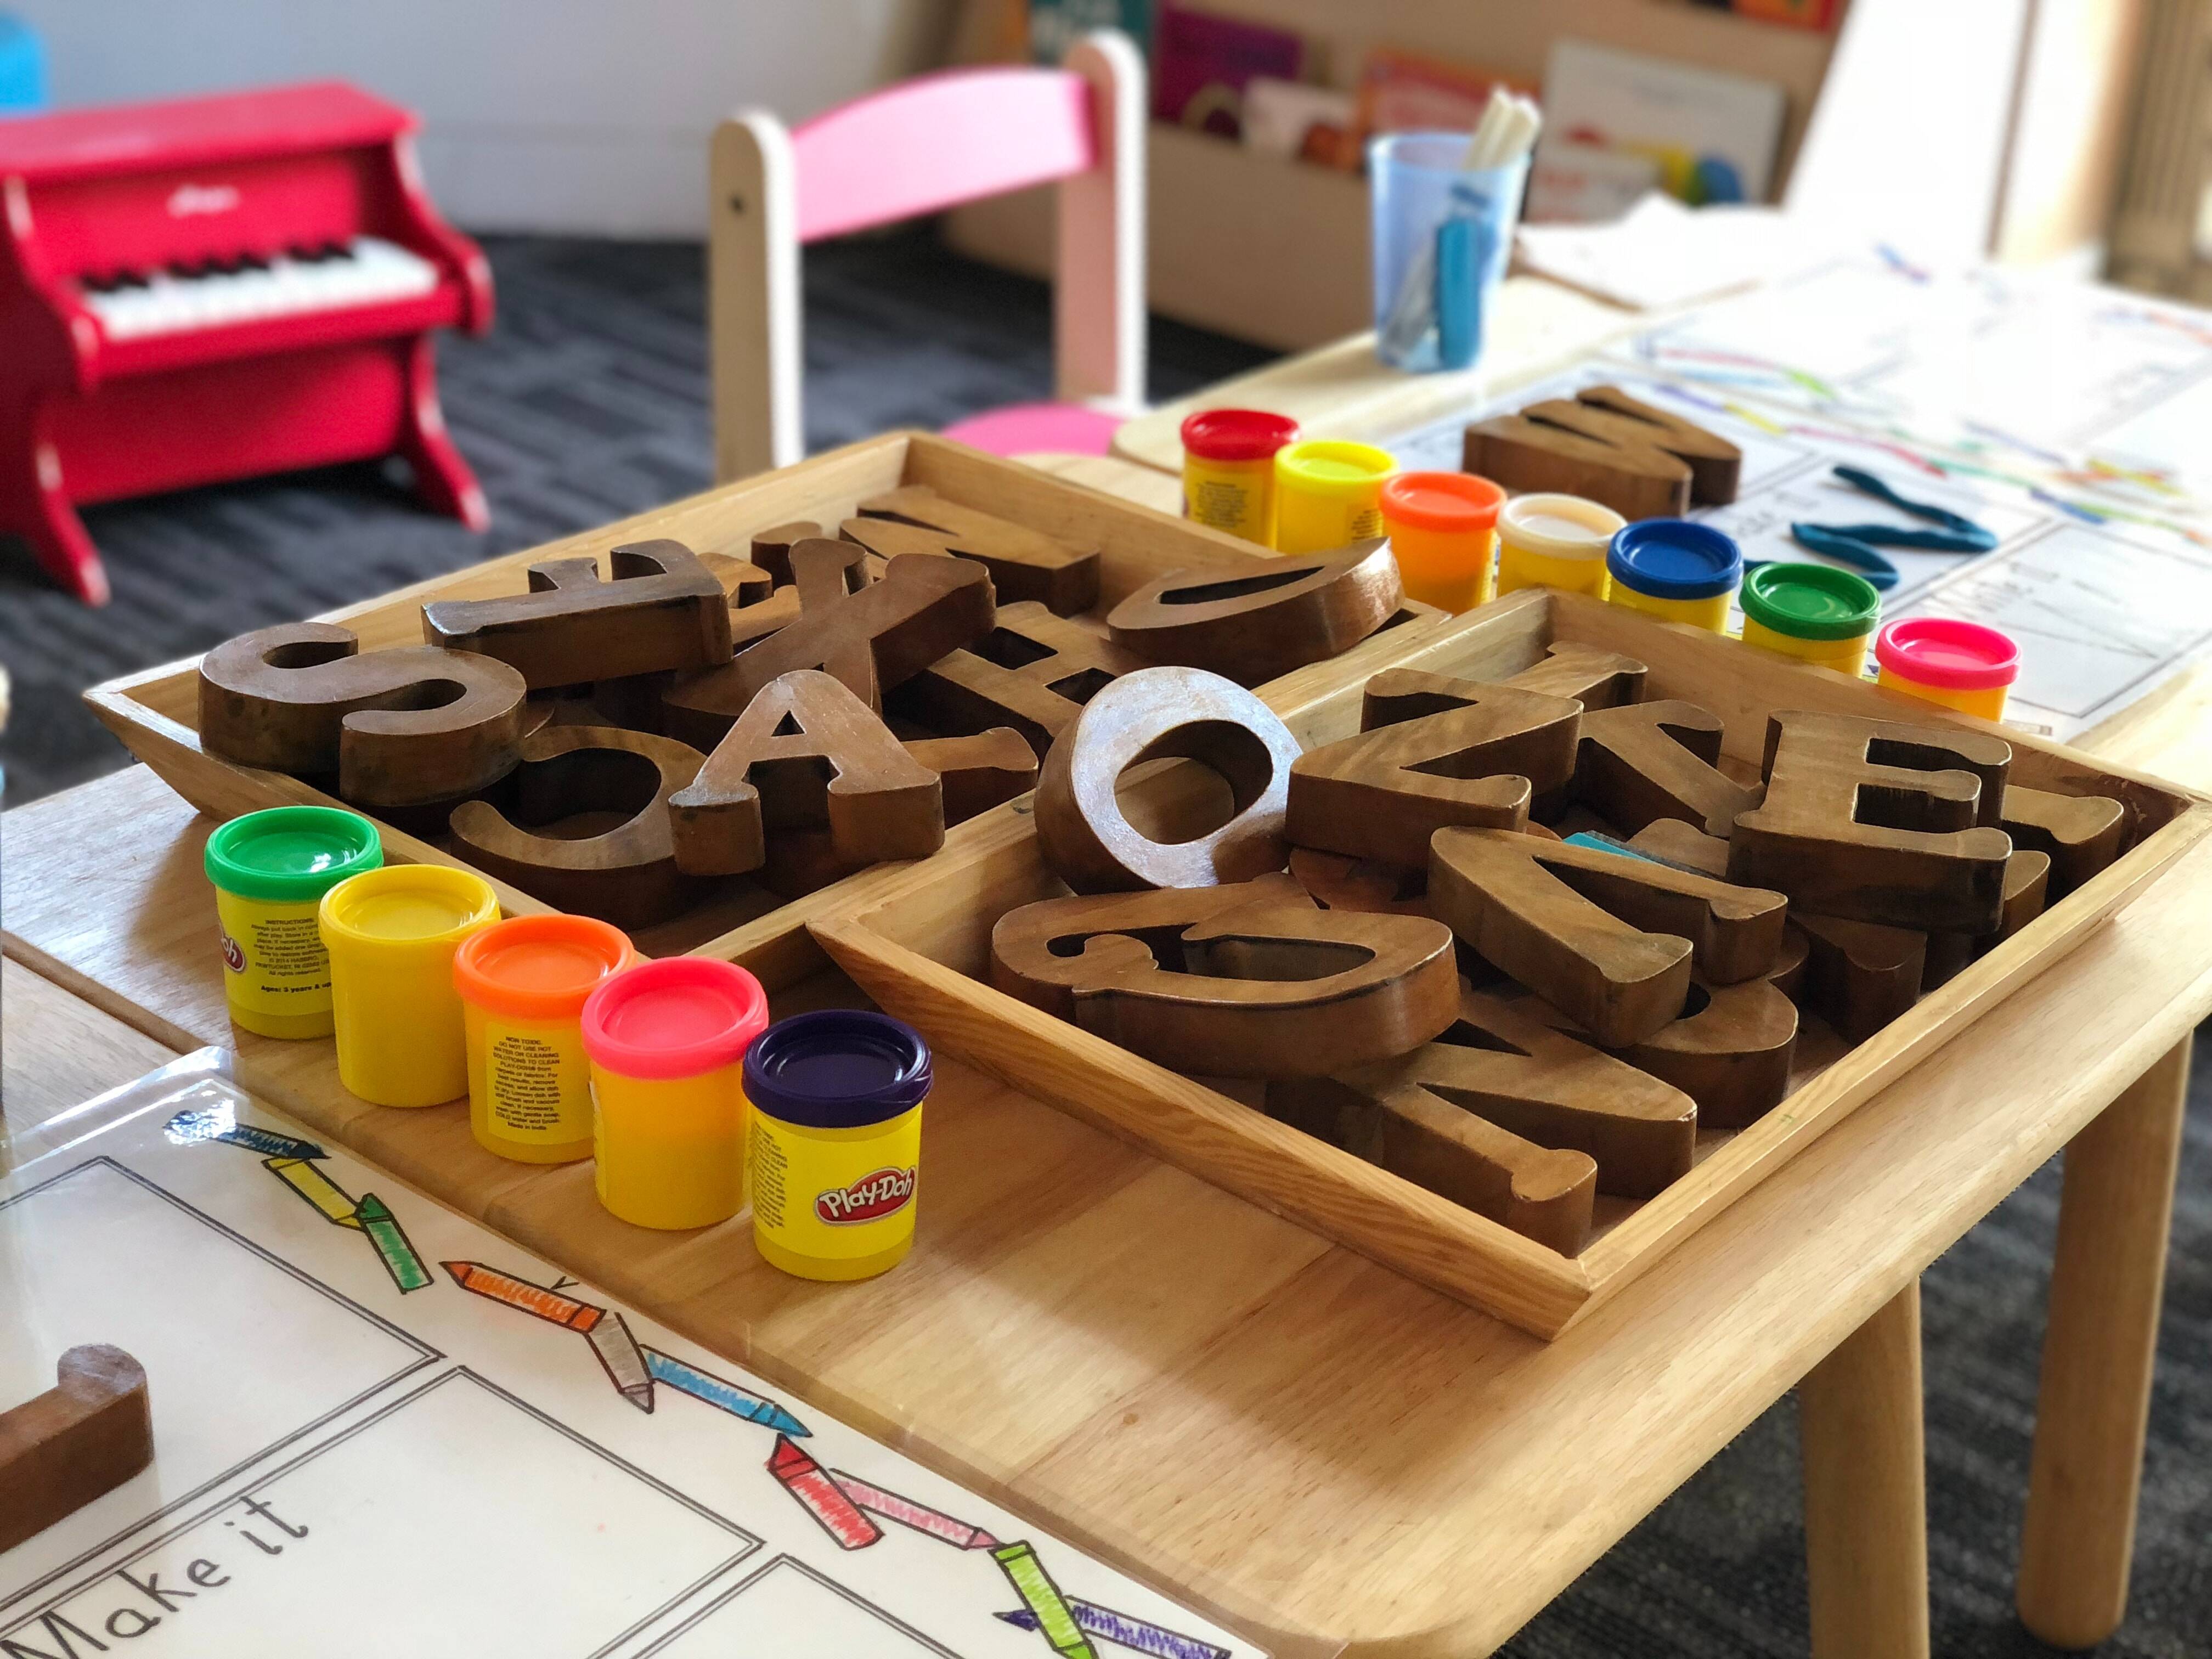 Choosing the Right Educational Toys for Your Kindergarten: A Guide for Wholesale Buyers